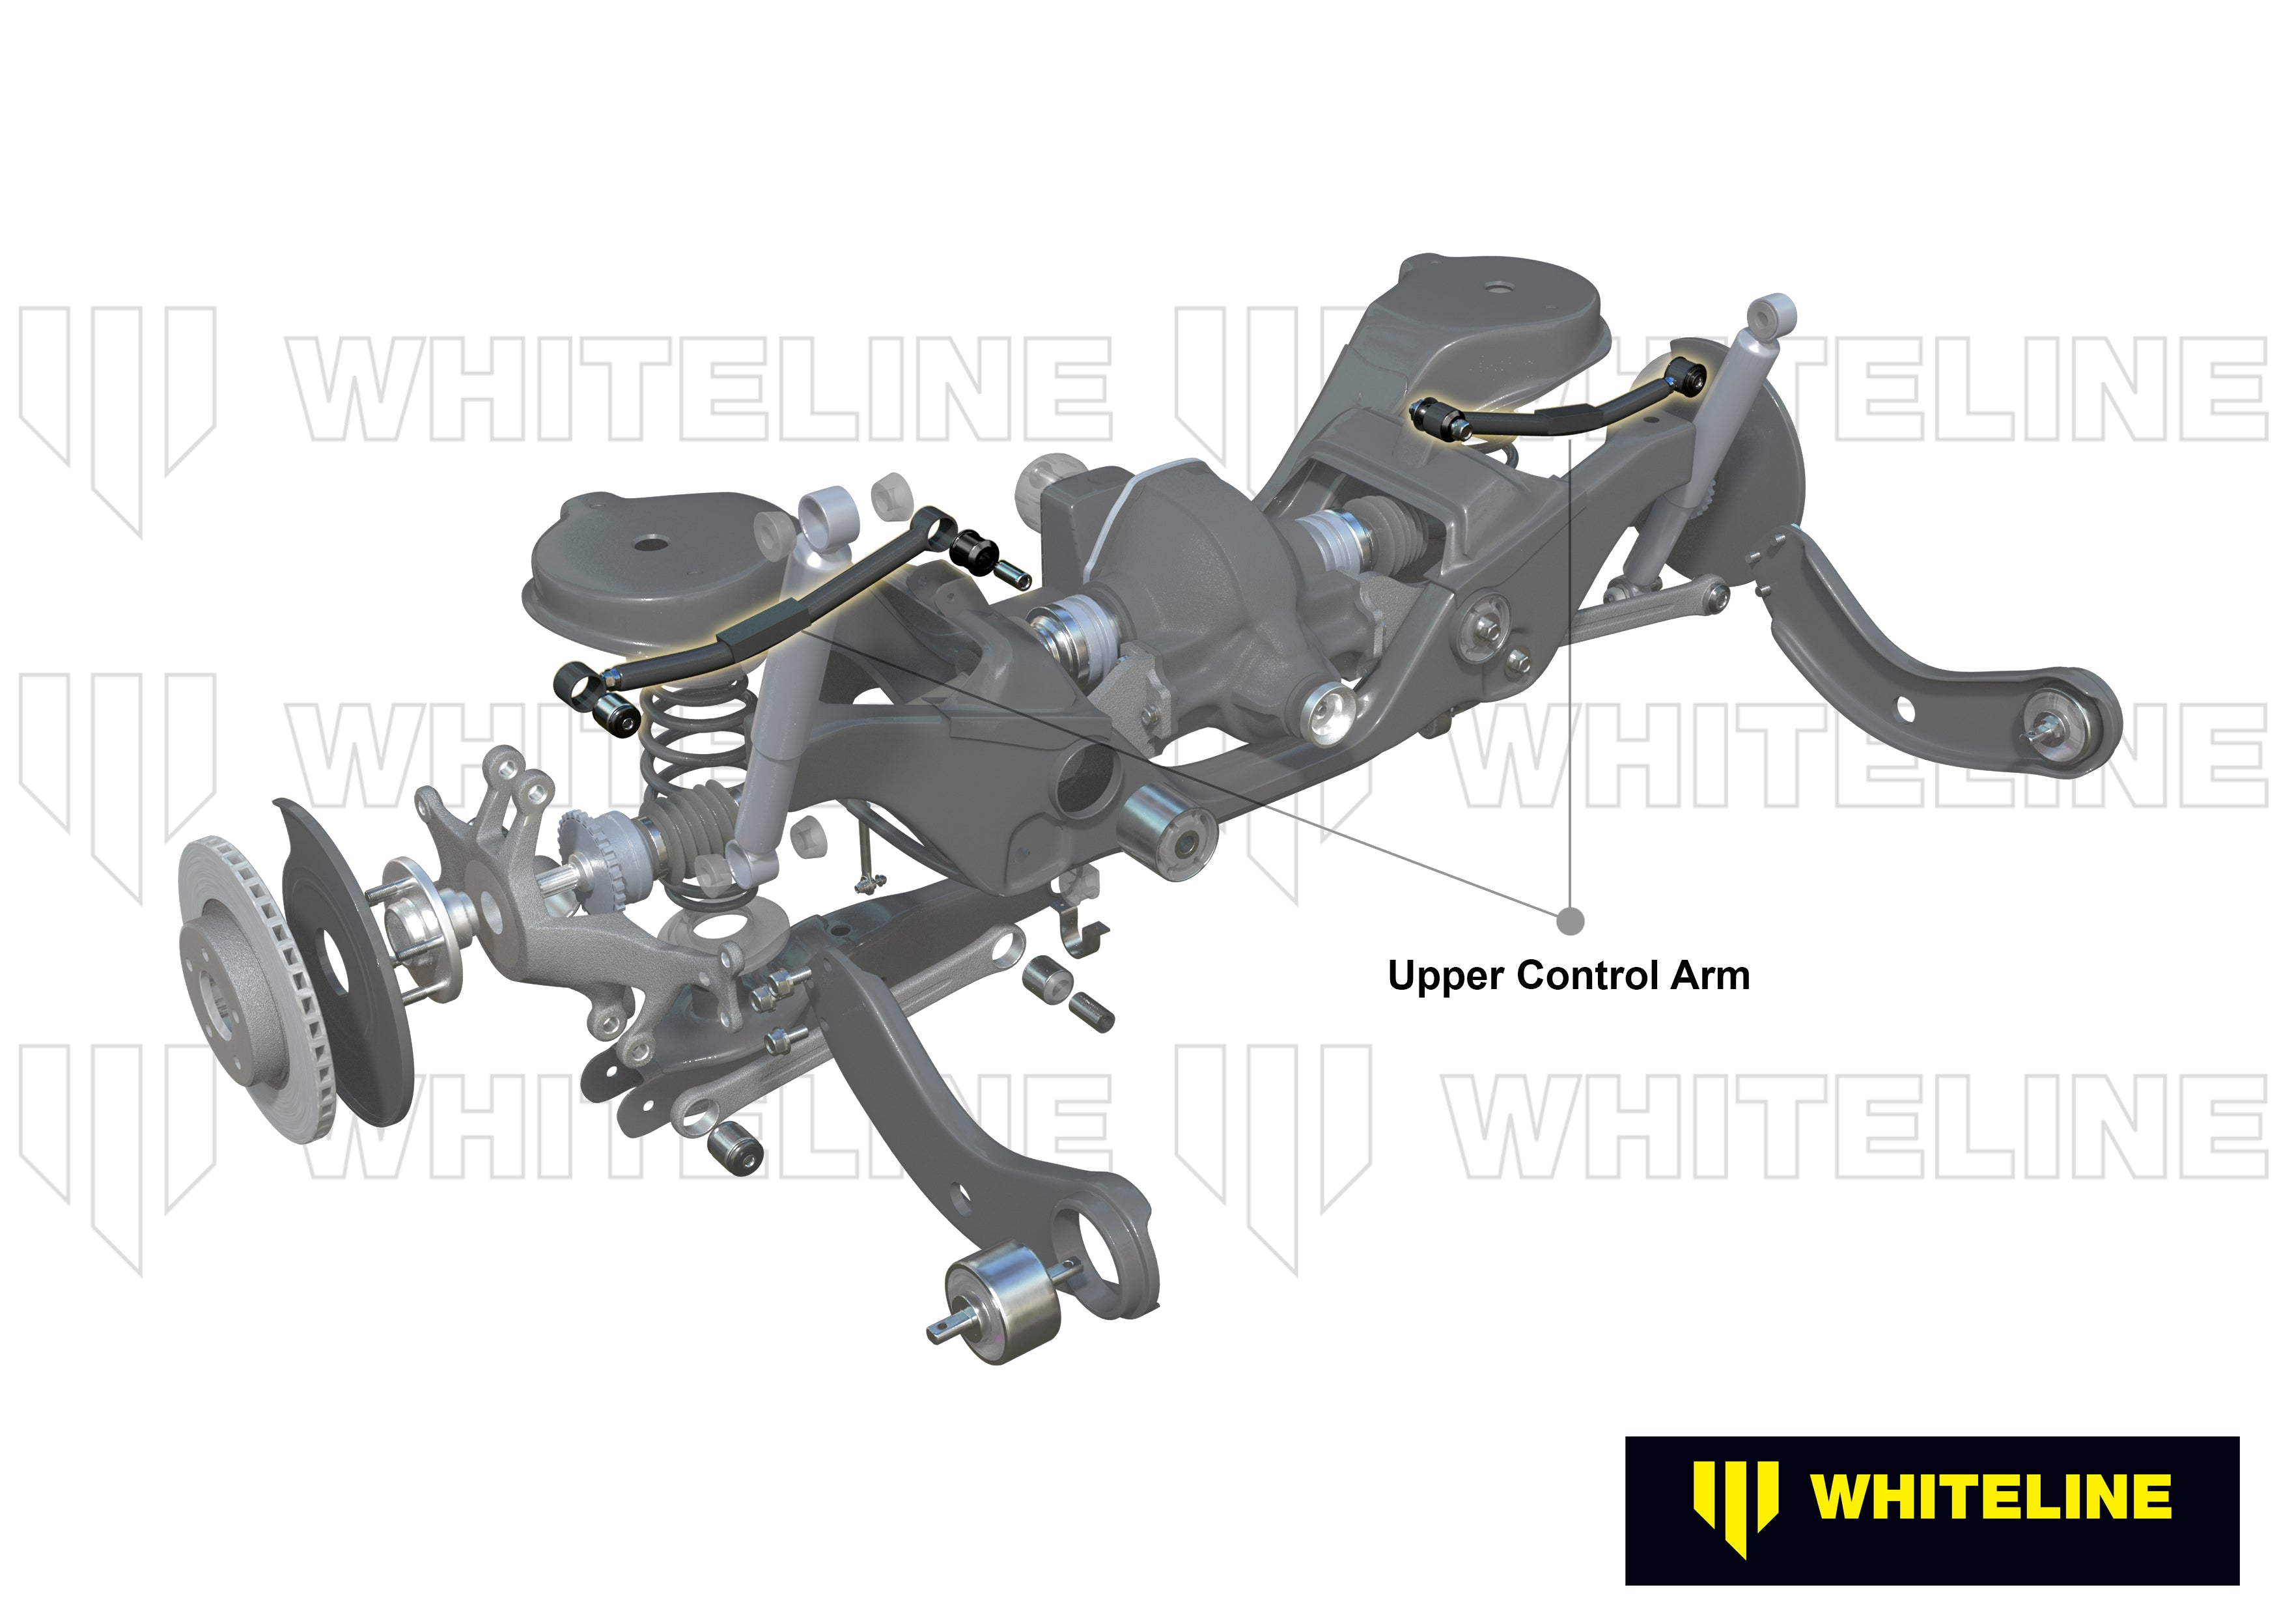 Rear Control Arm Upper - Arm to Suit Ford Falcon/Fairlane BA-FGX, Territory SX-SZ and FPV (WA438)